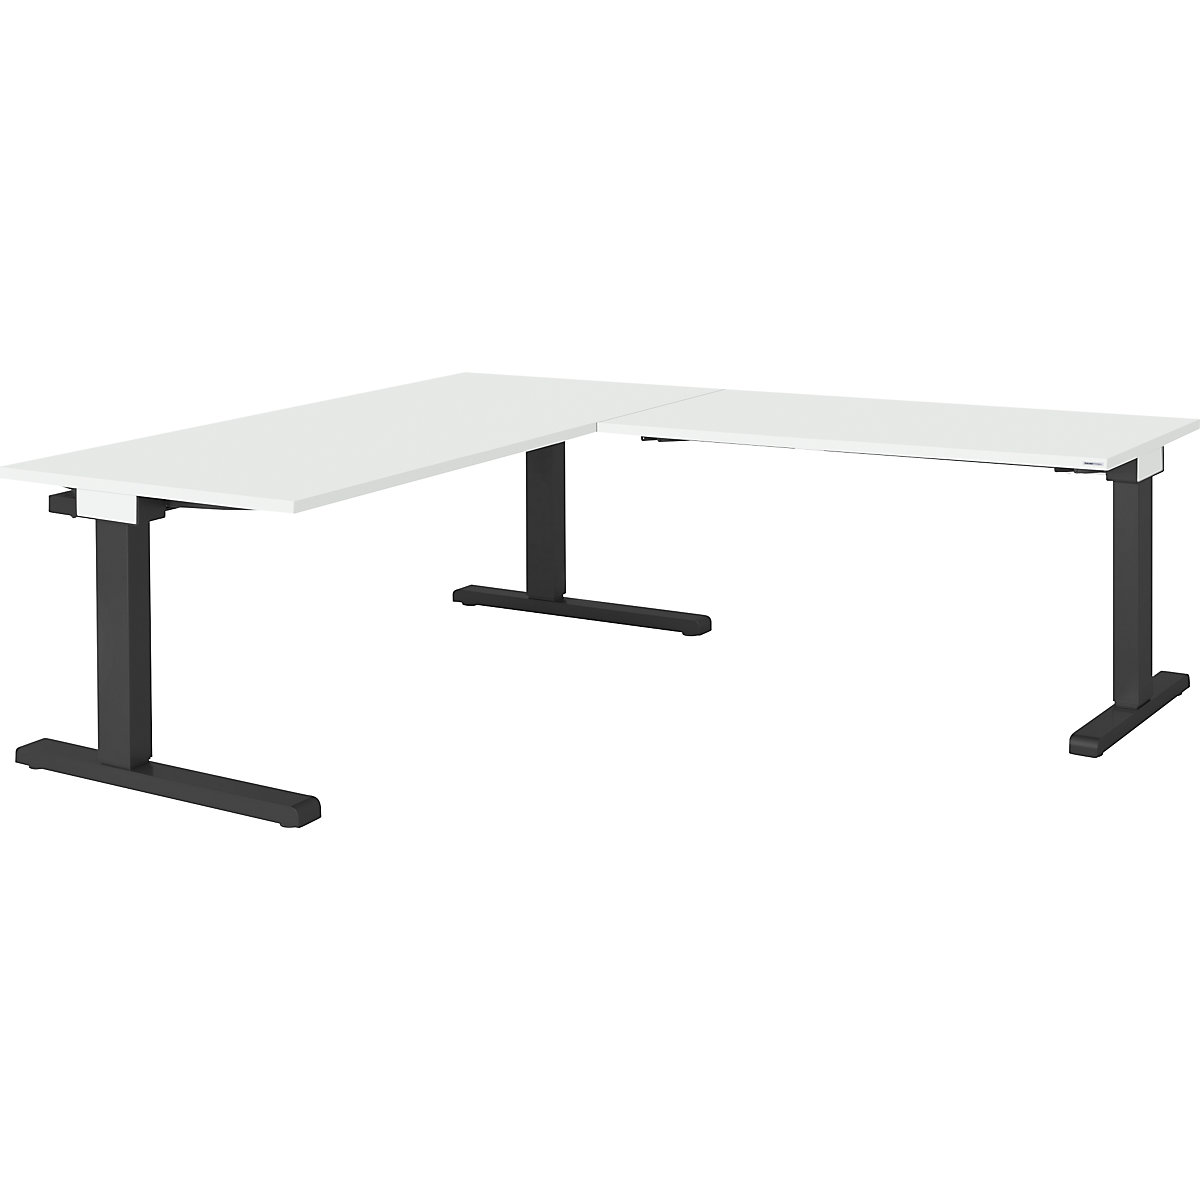 Desk, interlinked – mauser, WxD 1600 x 800 mm, angled extension on right (width 1200 mm), light grey top, charcoal frame-2